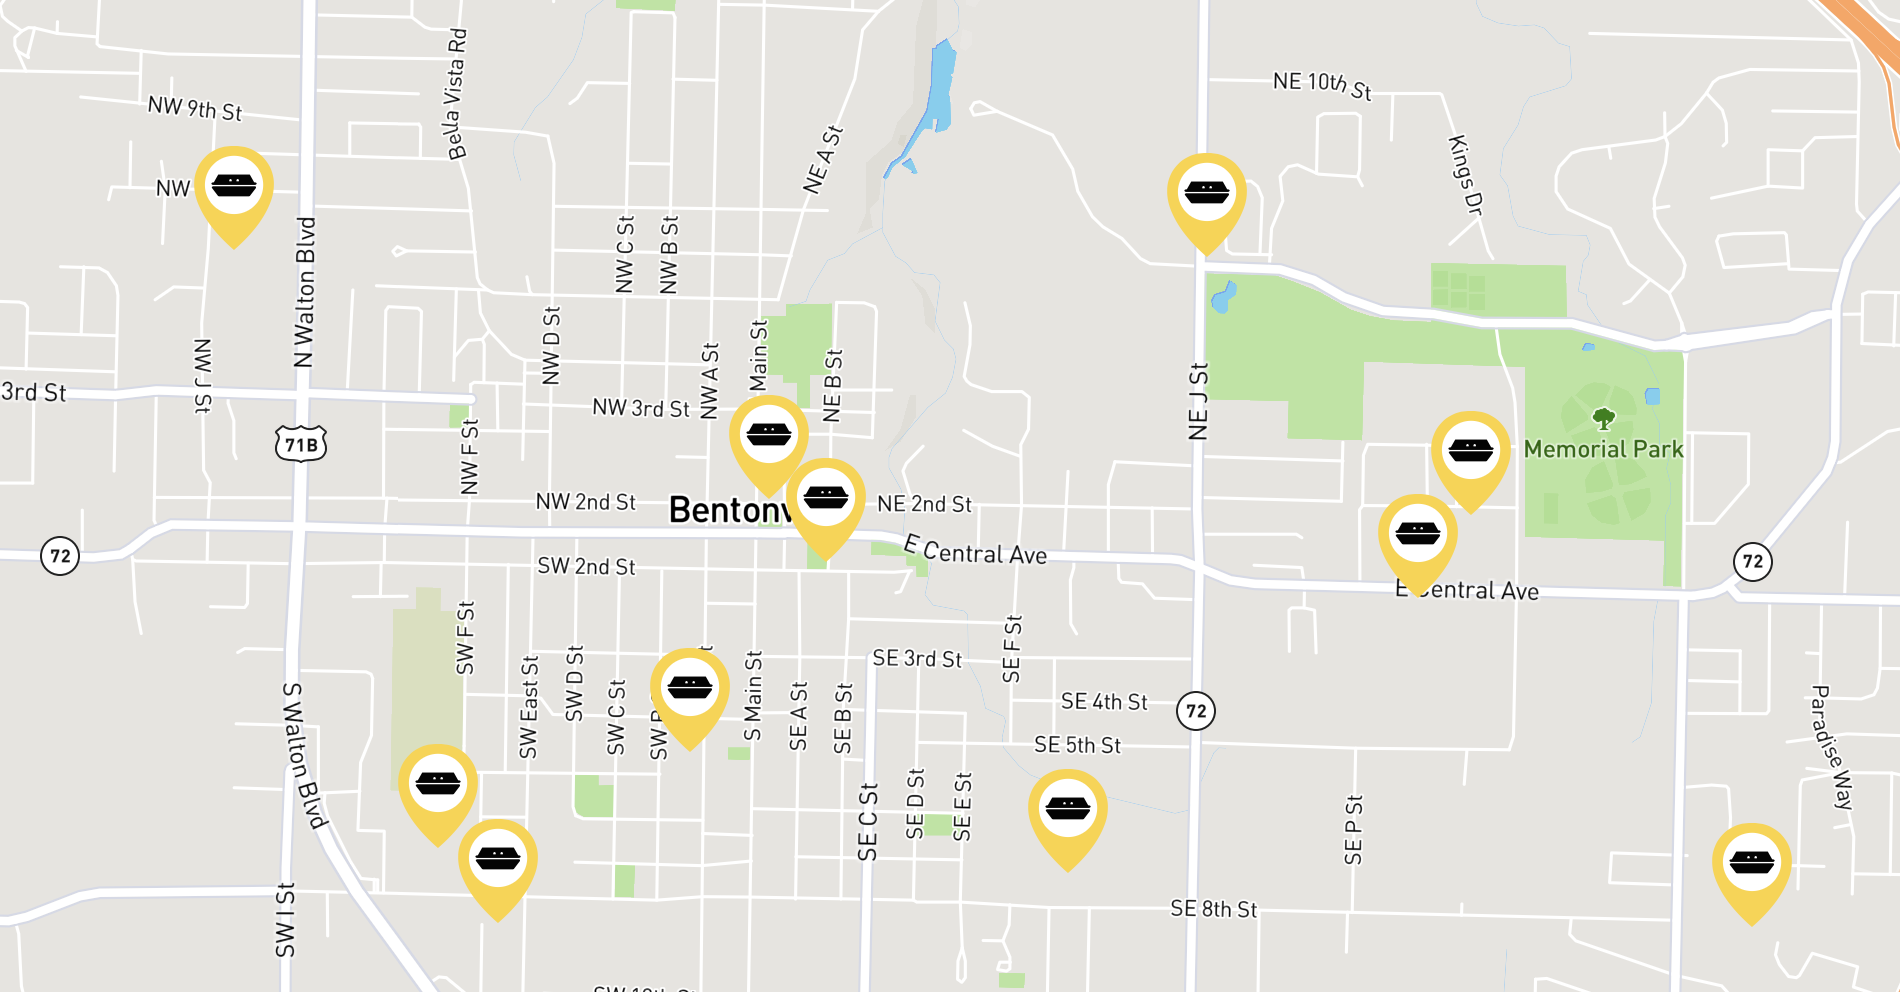 Luncher hot spots are spread across Bentonville and the rest of Northwest Arkansas.